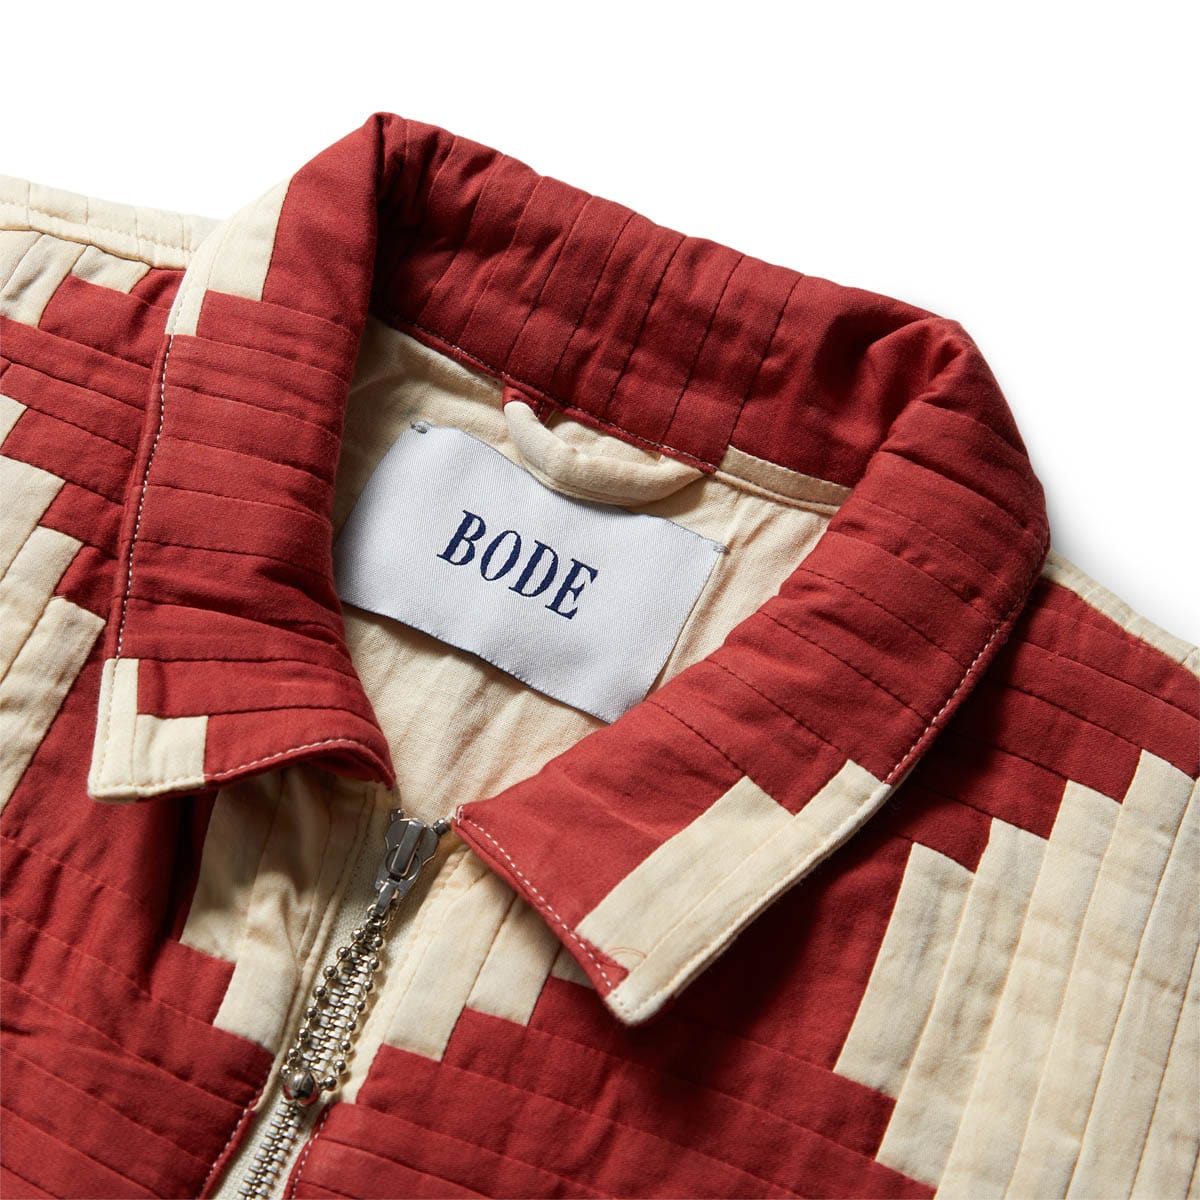 BODE Outerwear COURTHOUSE STEPS SATEEN JACKET